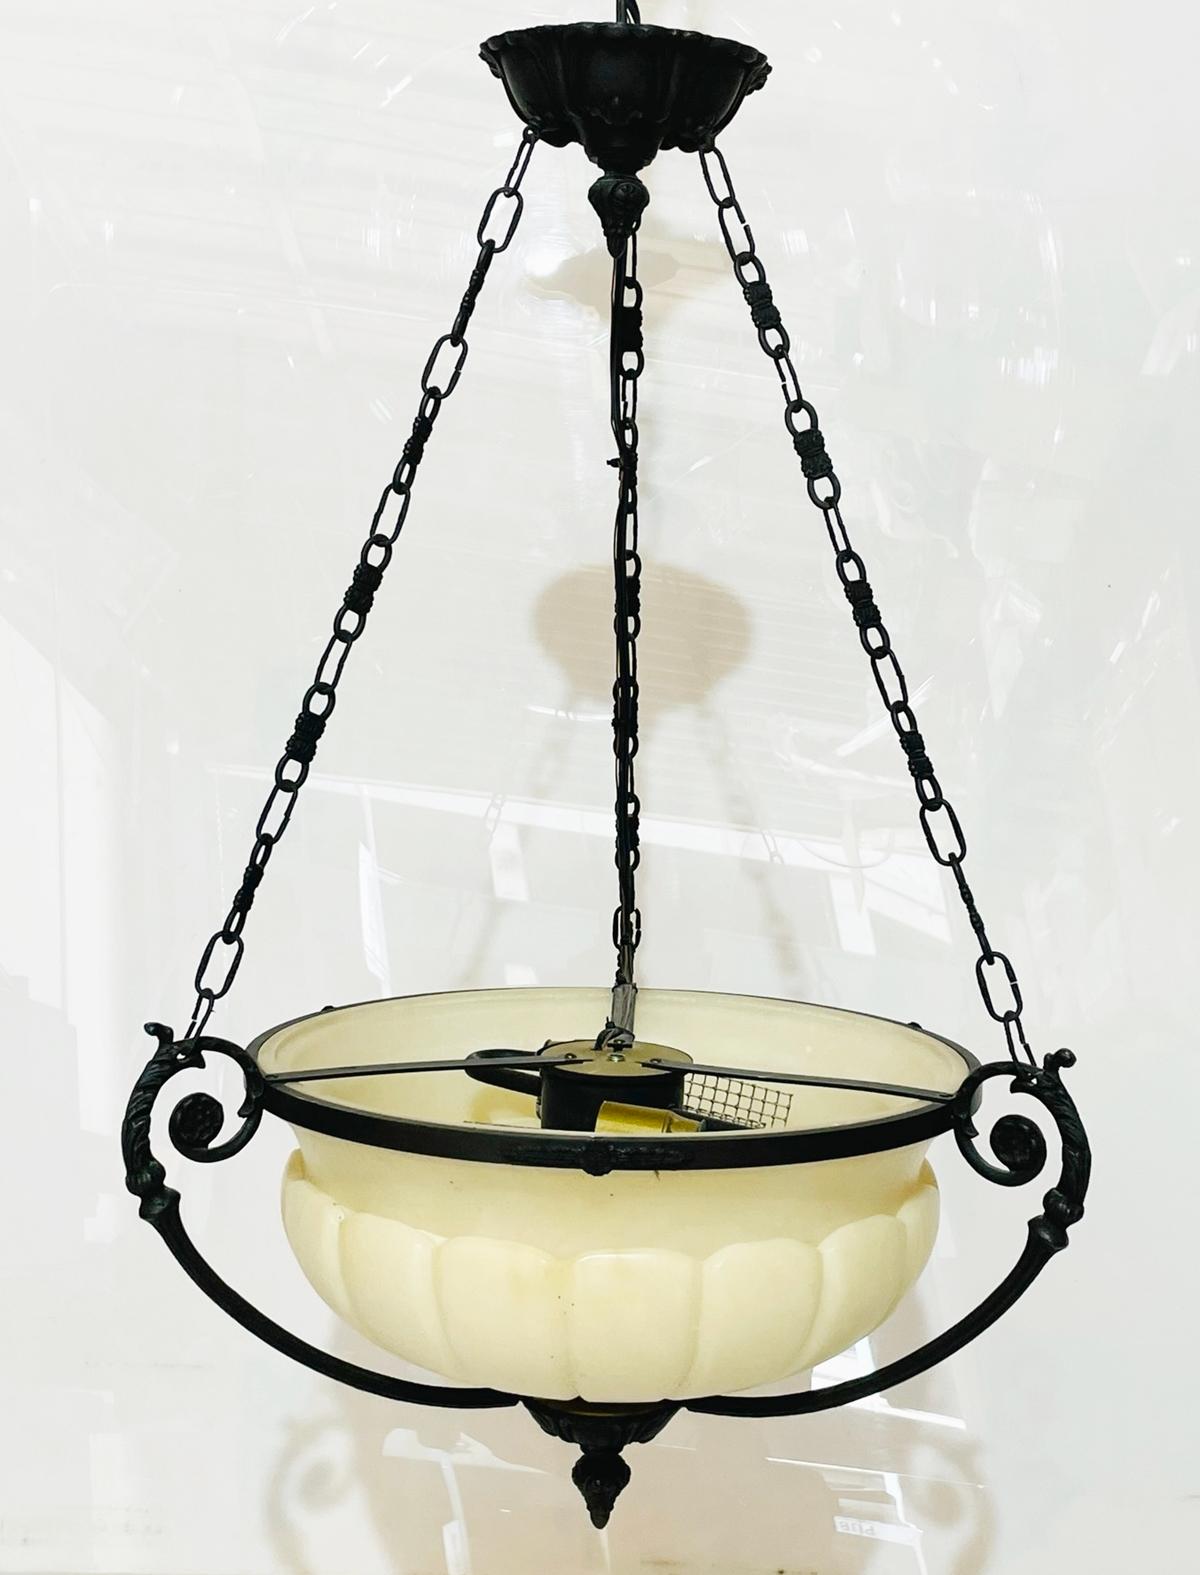 Beautiful chandelier in alabaster and bronze hardware.
The chandelier takes 3 60 watt light bulbs.

The chandelier is made in Spain, the hardware and chain is bronze, and the alabaster shade has a beautiful ribbed body.

Measurements:
35